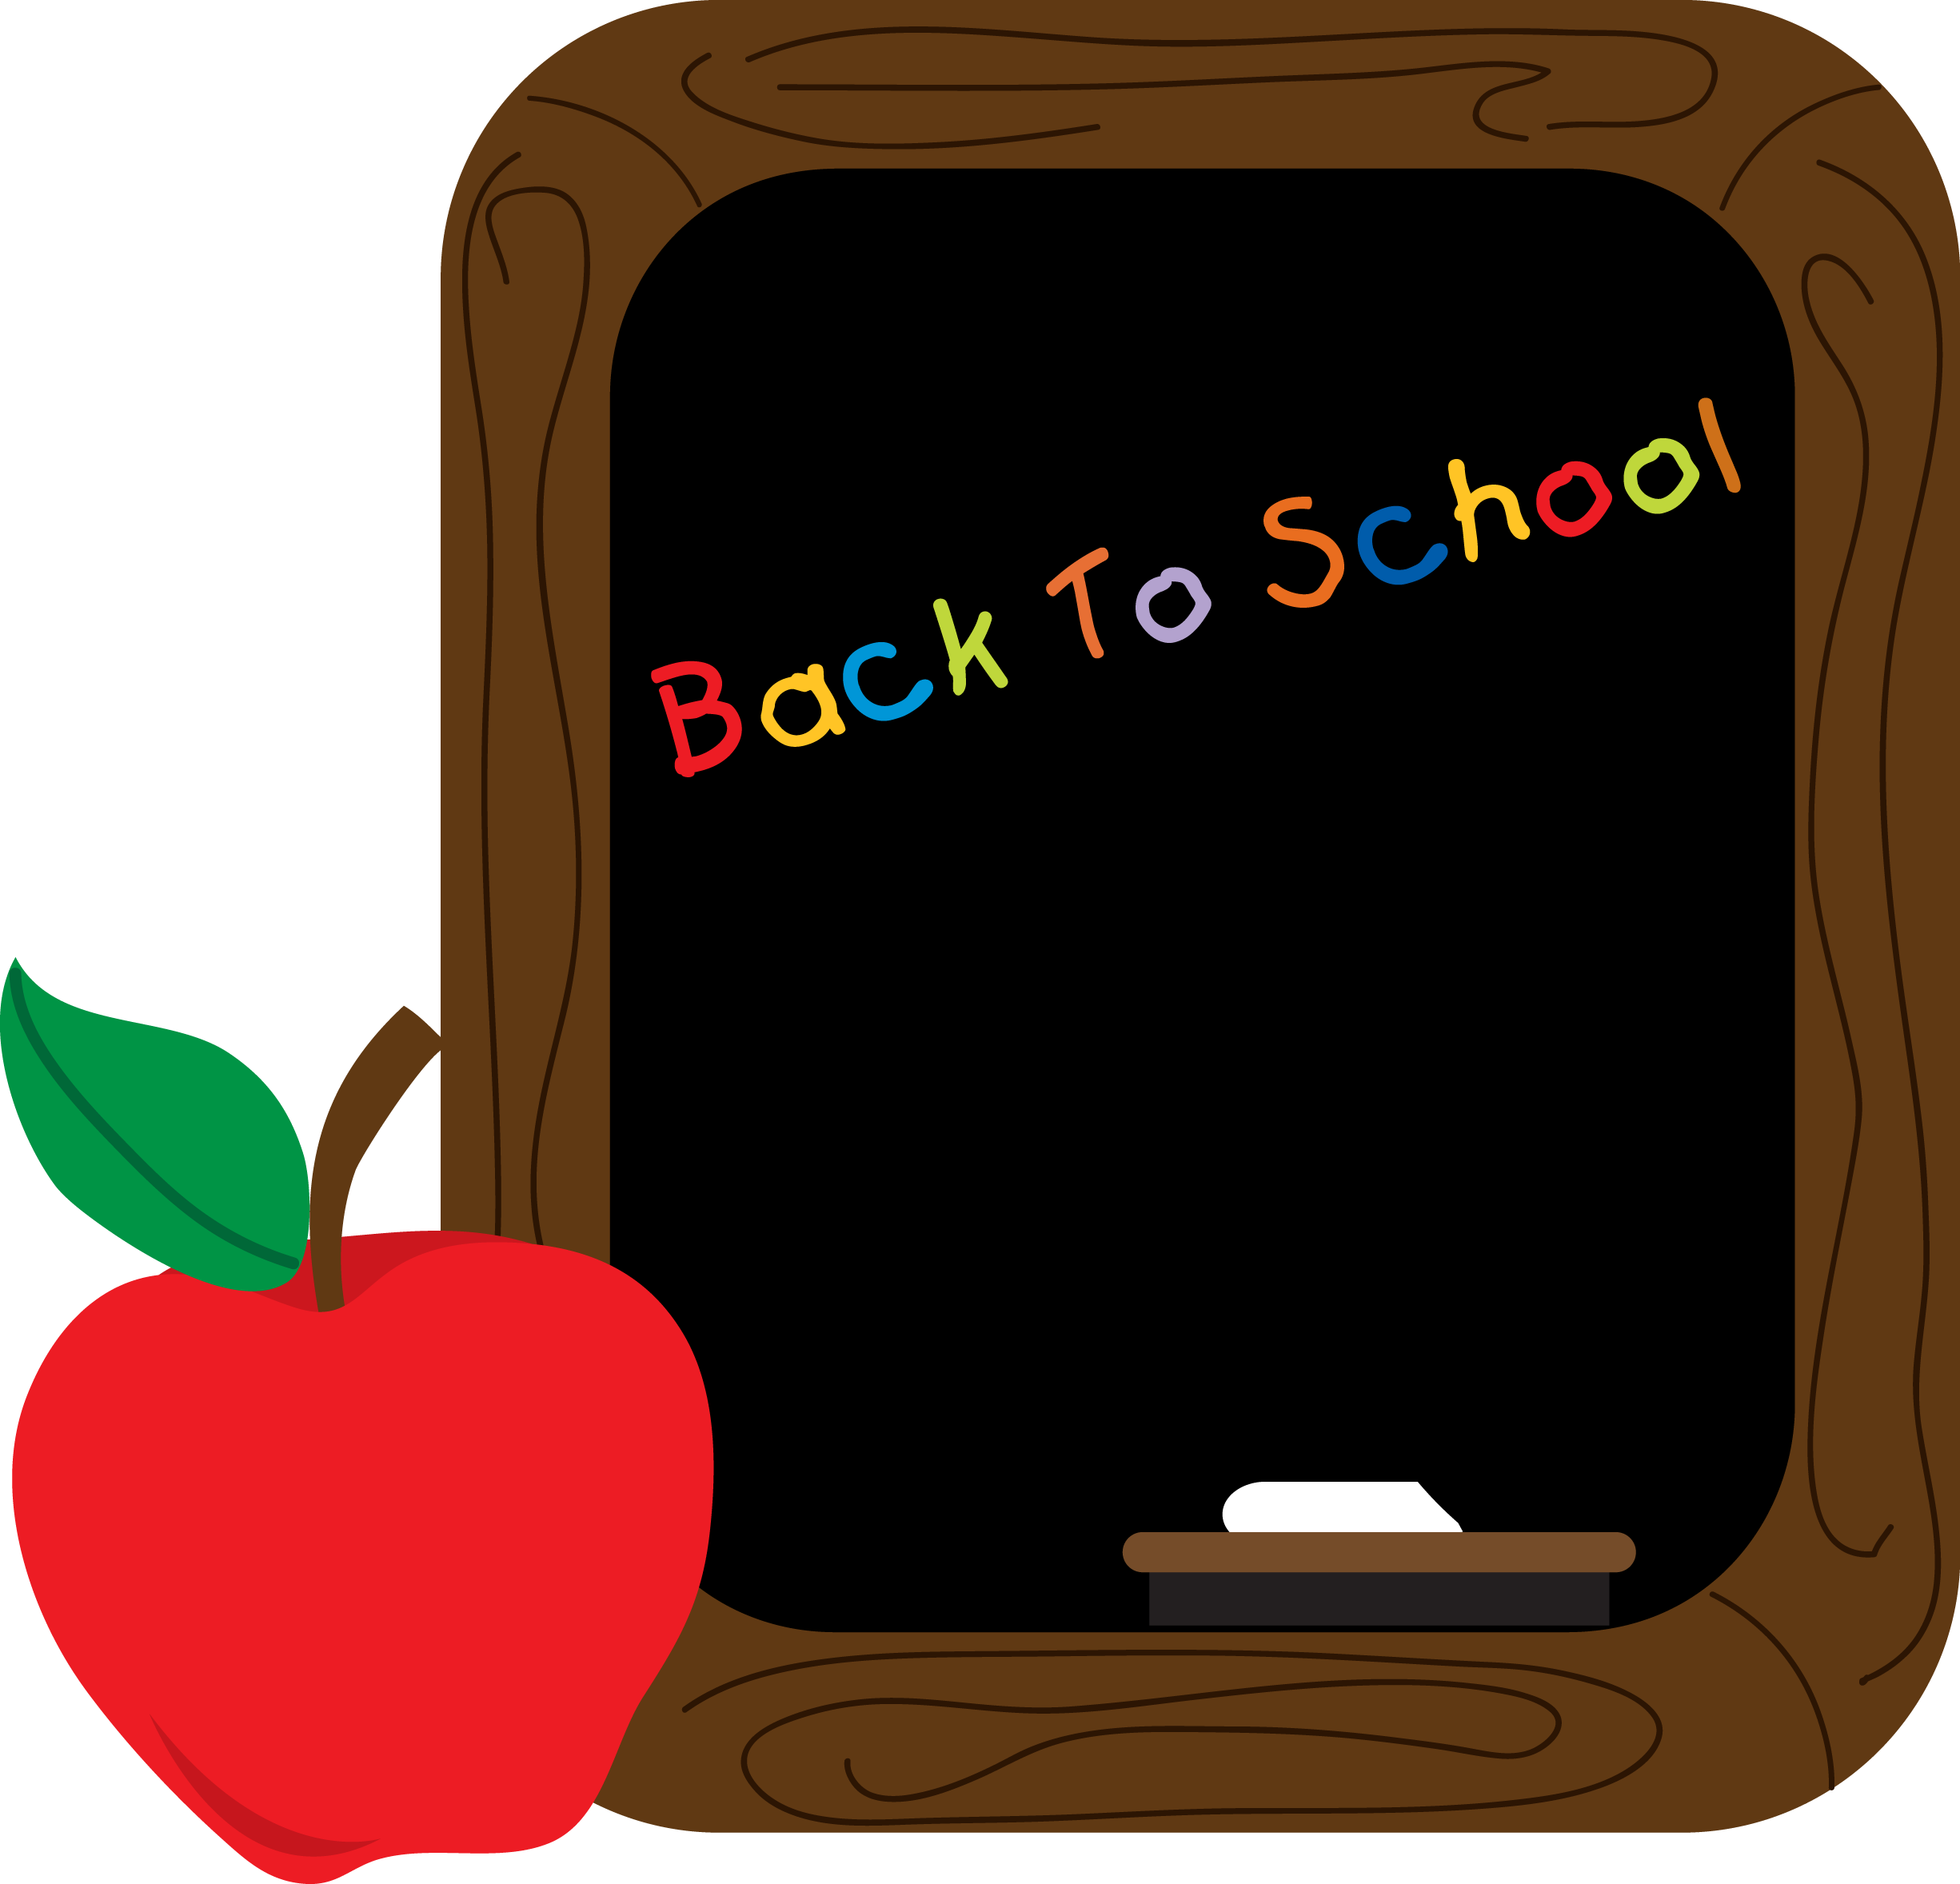 clip art pictures back to school - photo #6